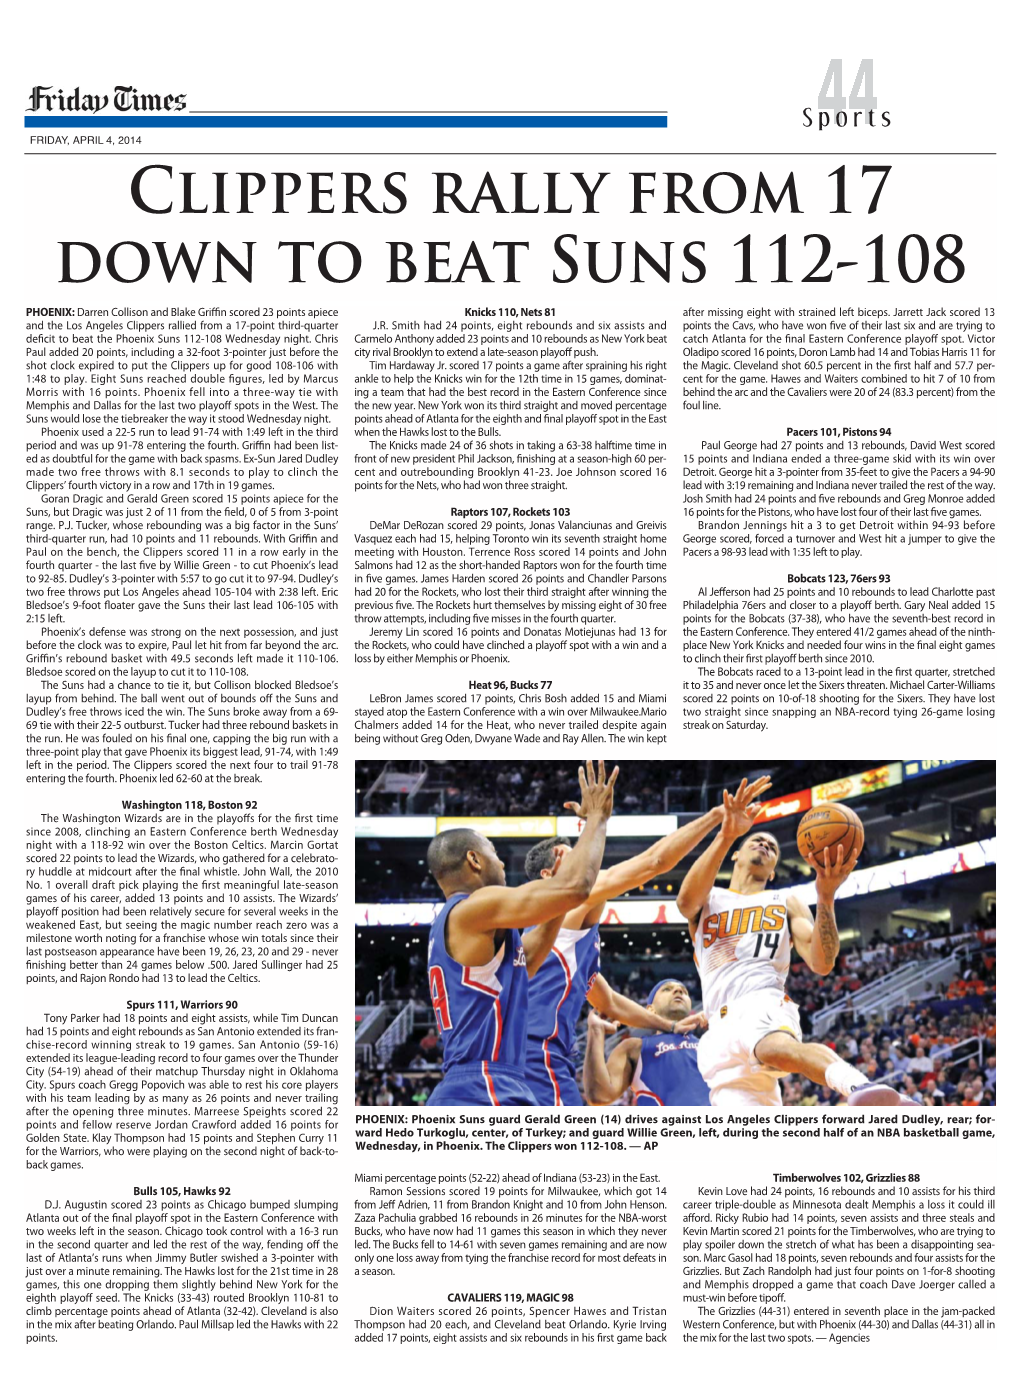 Clippers Rally from 17 Down to Beat Suns 112-108